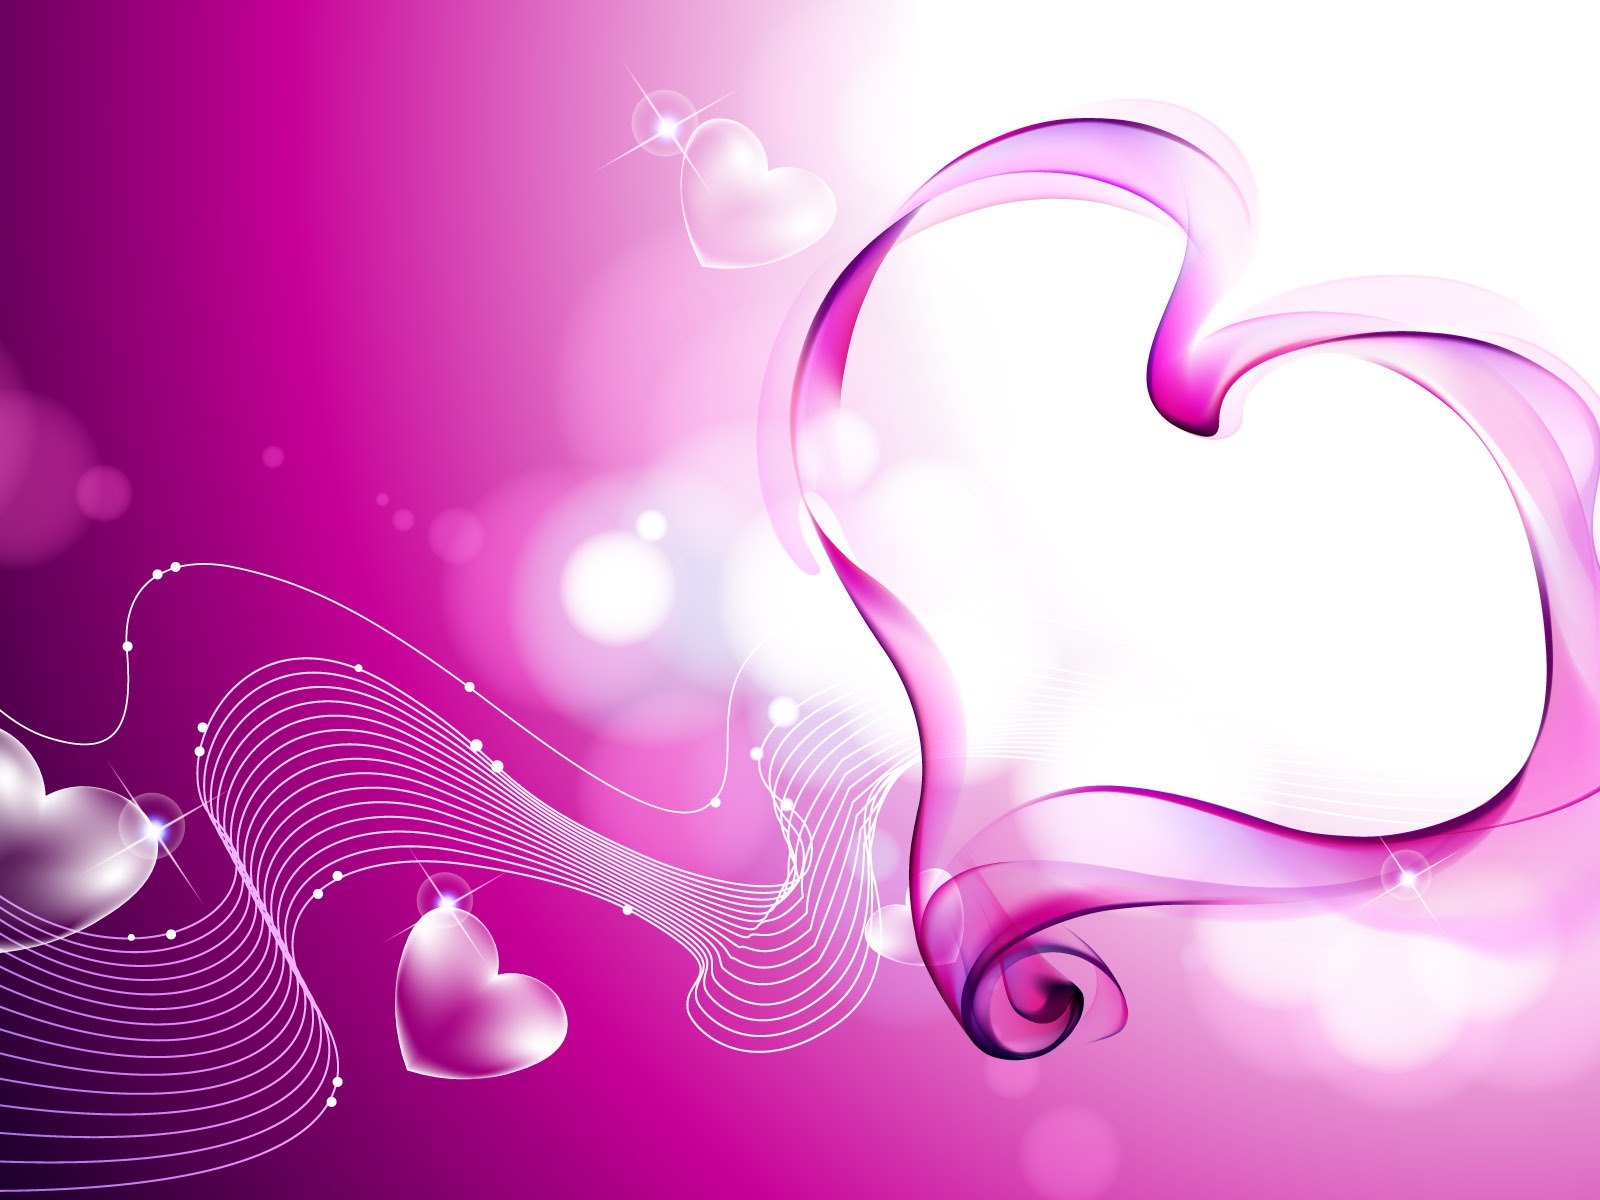 Valentine's Day Love Theme Wallpapers (3) #6 - 1600x1200